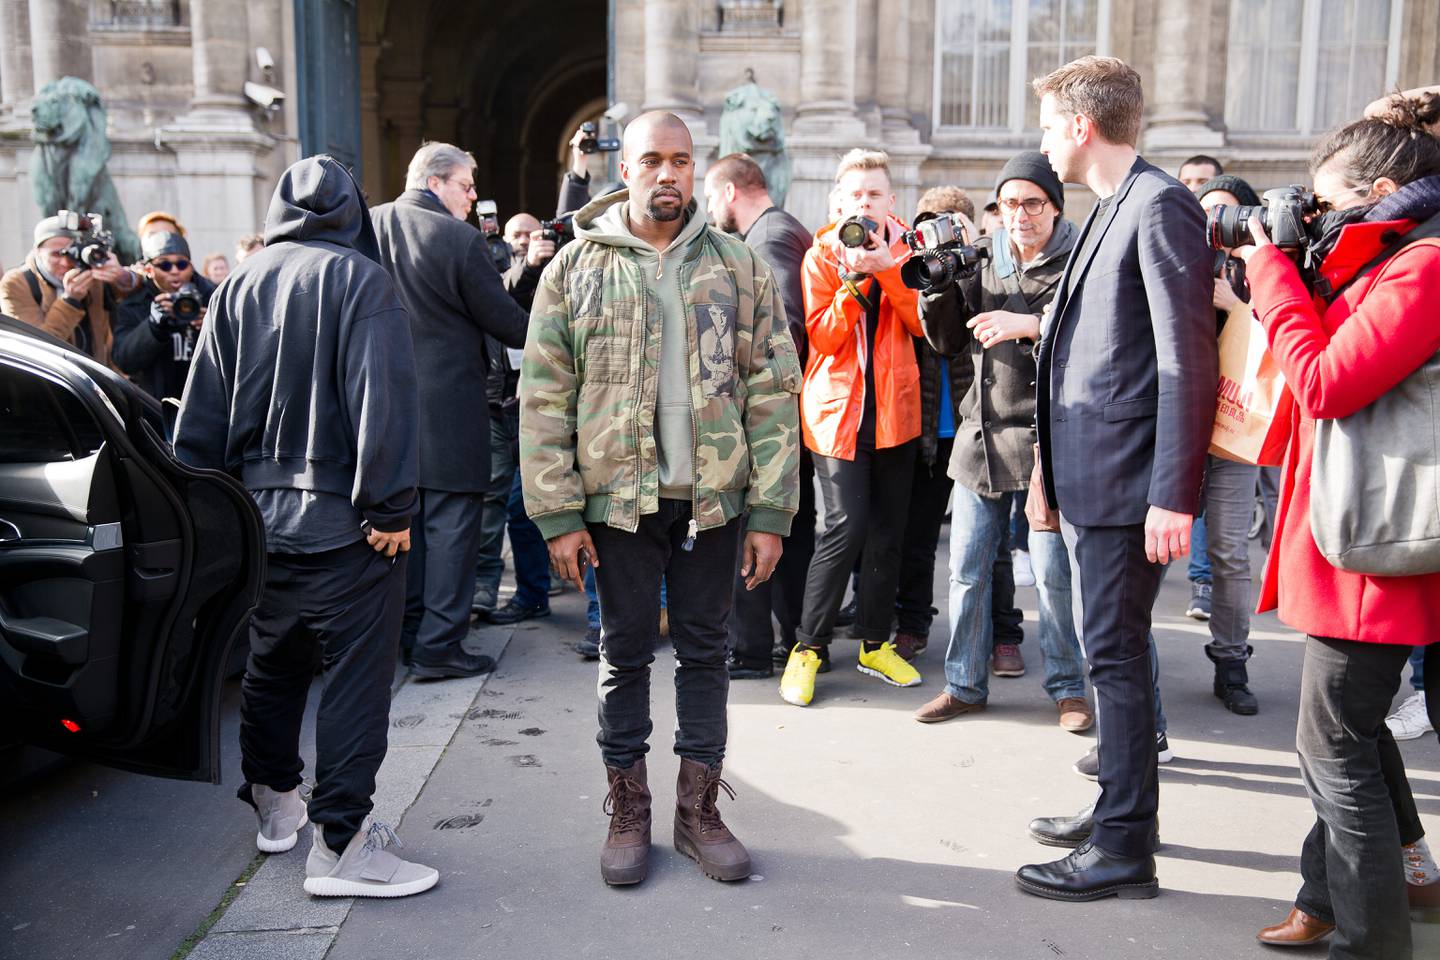 Gap's partnership with Kanye West's Yeezy has brought the brand media attention.